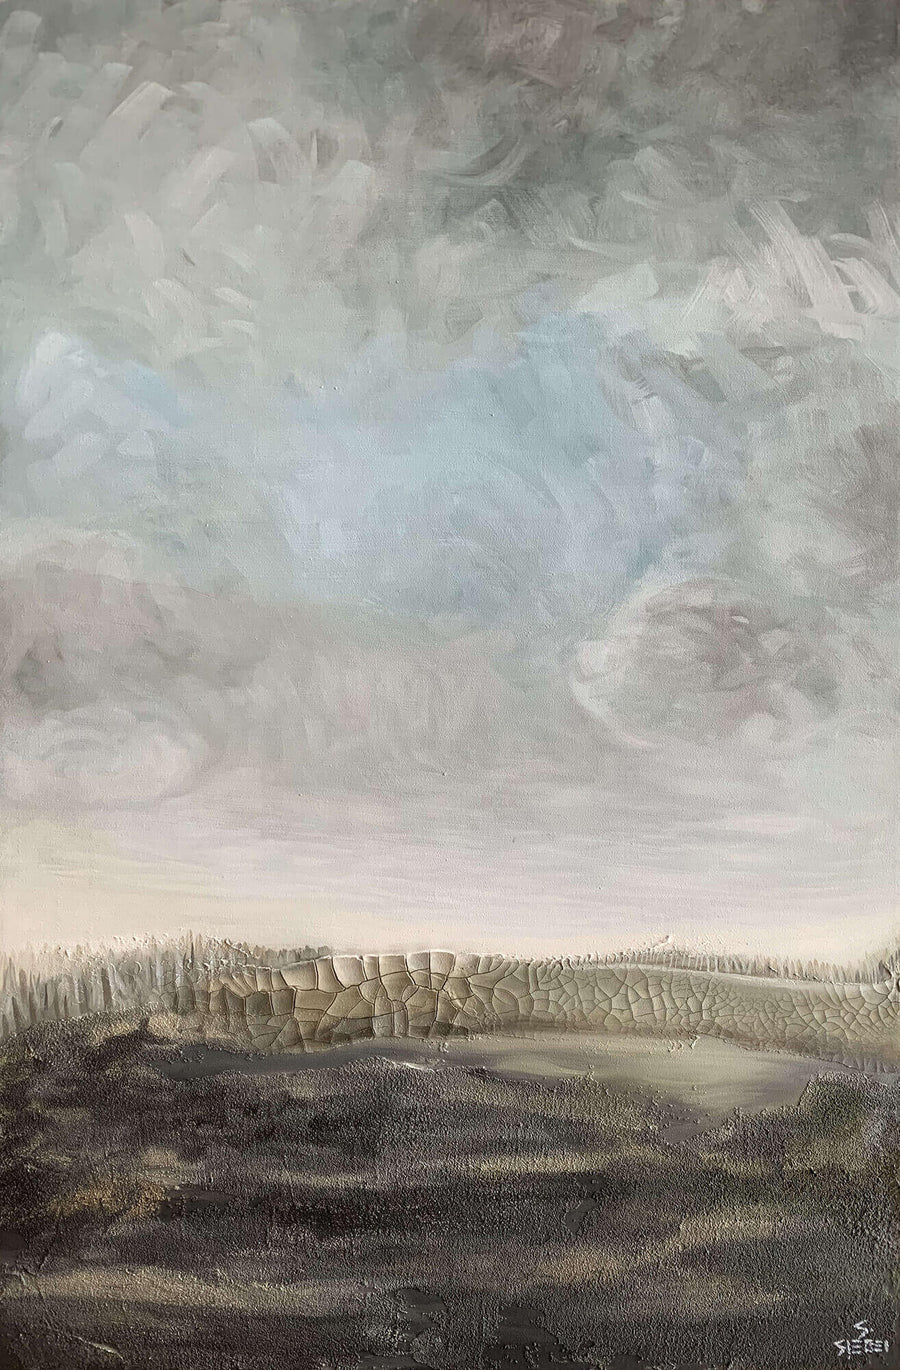 Muted grey and white abstract painting with thick texture and clouds